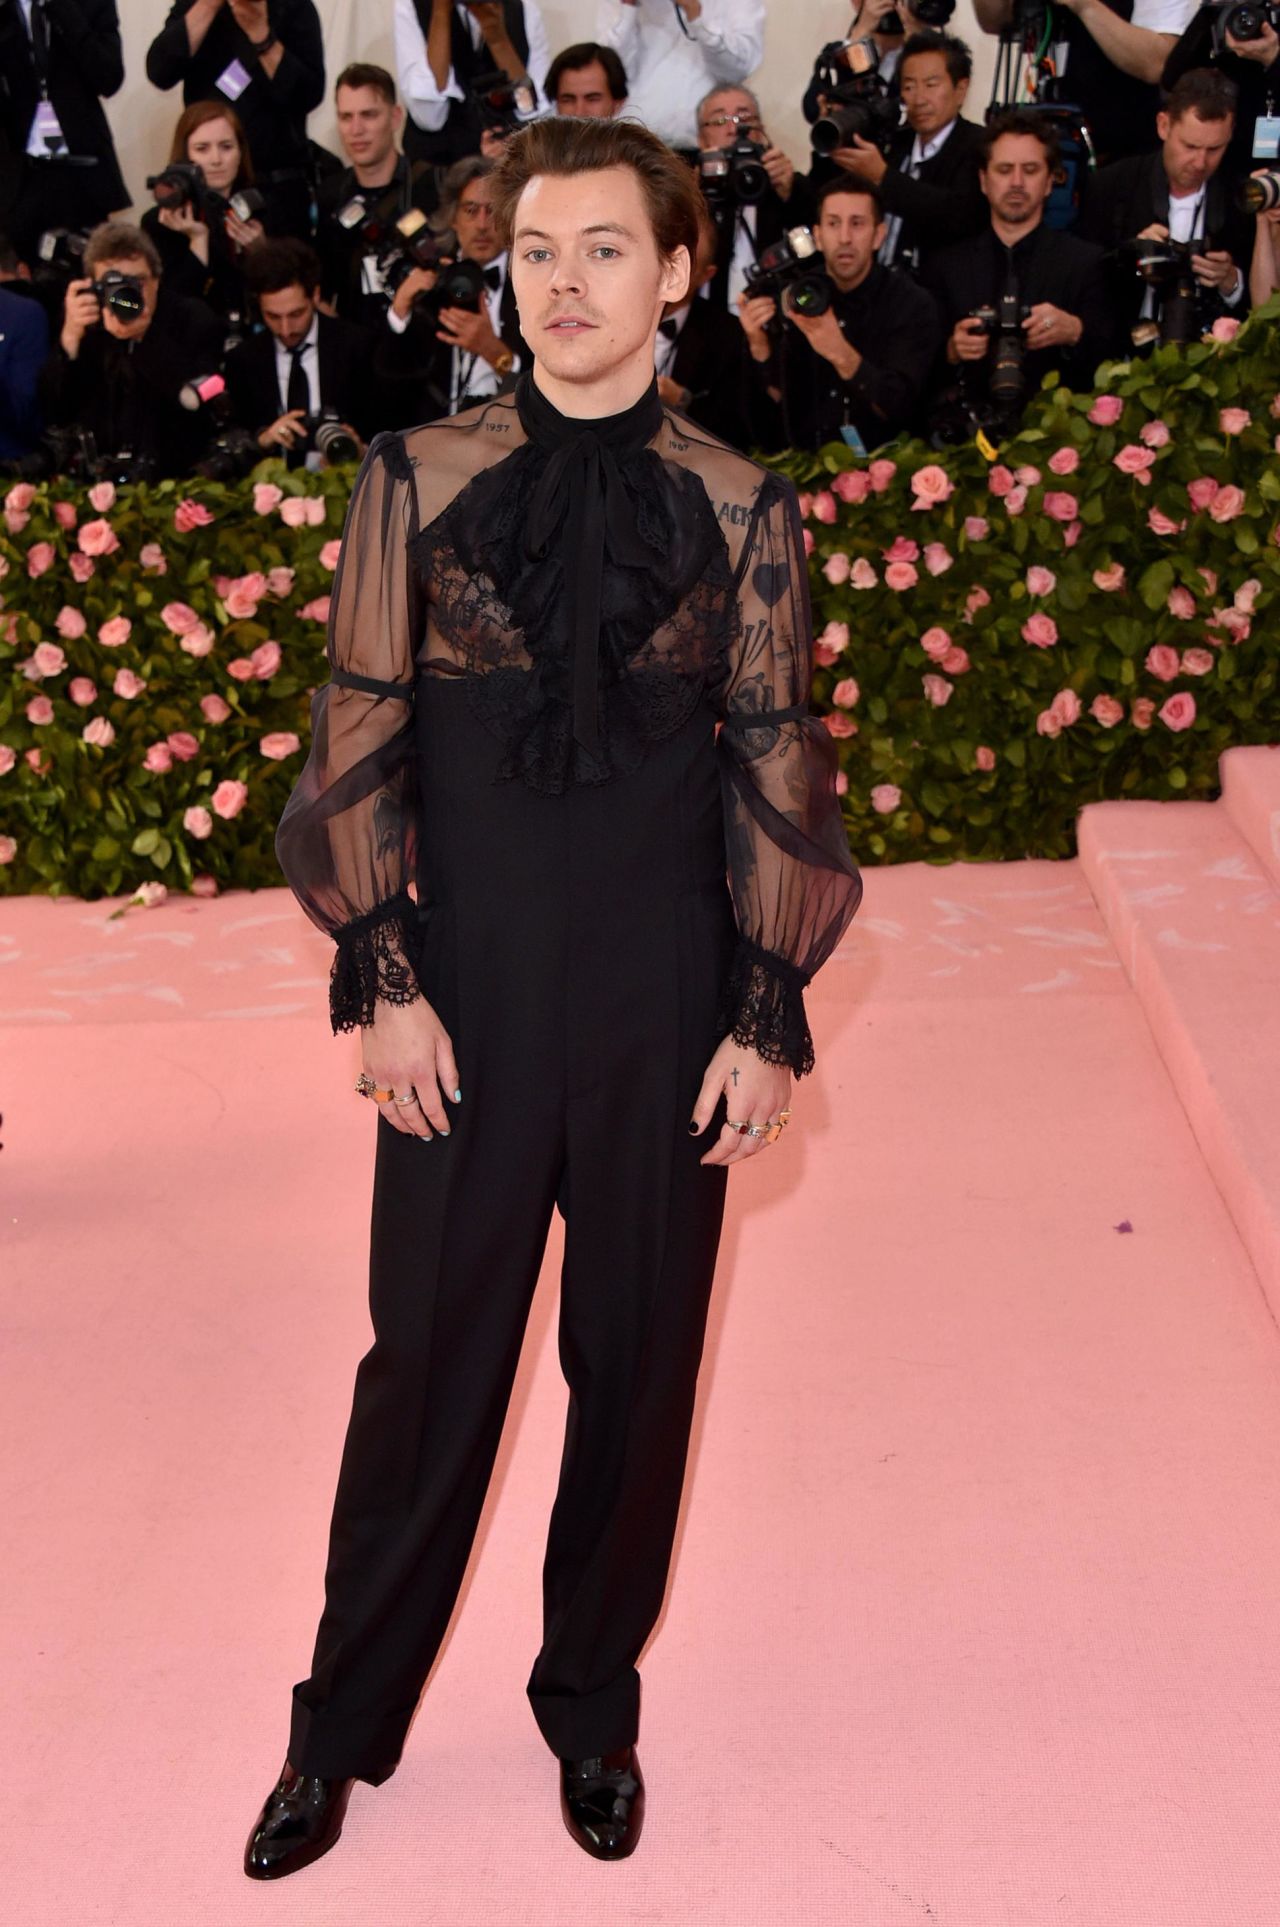 Styles attends the Met Gala in 2019 as a co-host, as well as a guest, in Gucci.